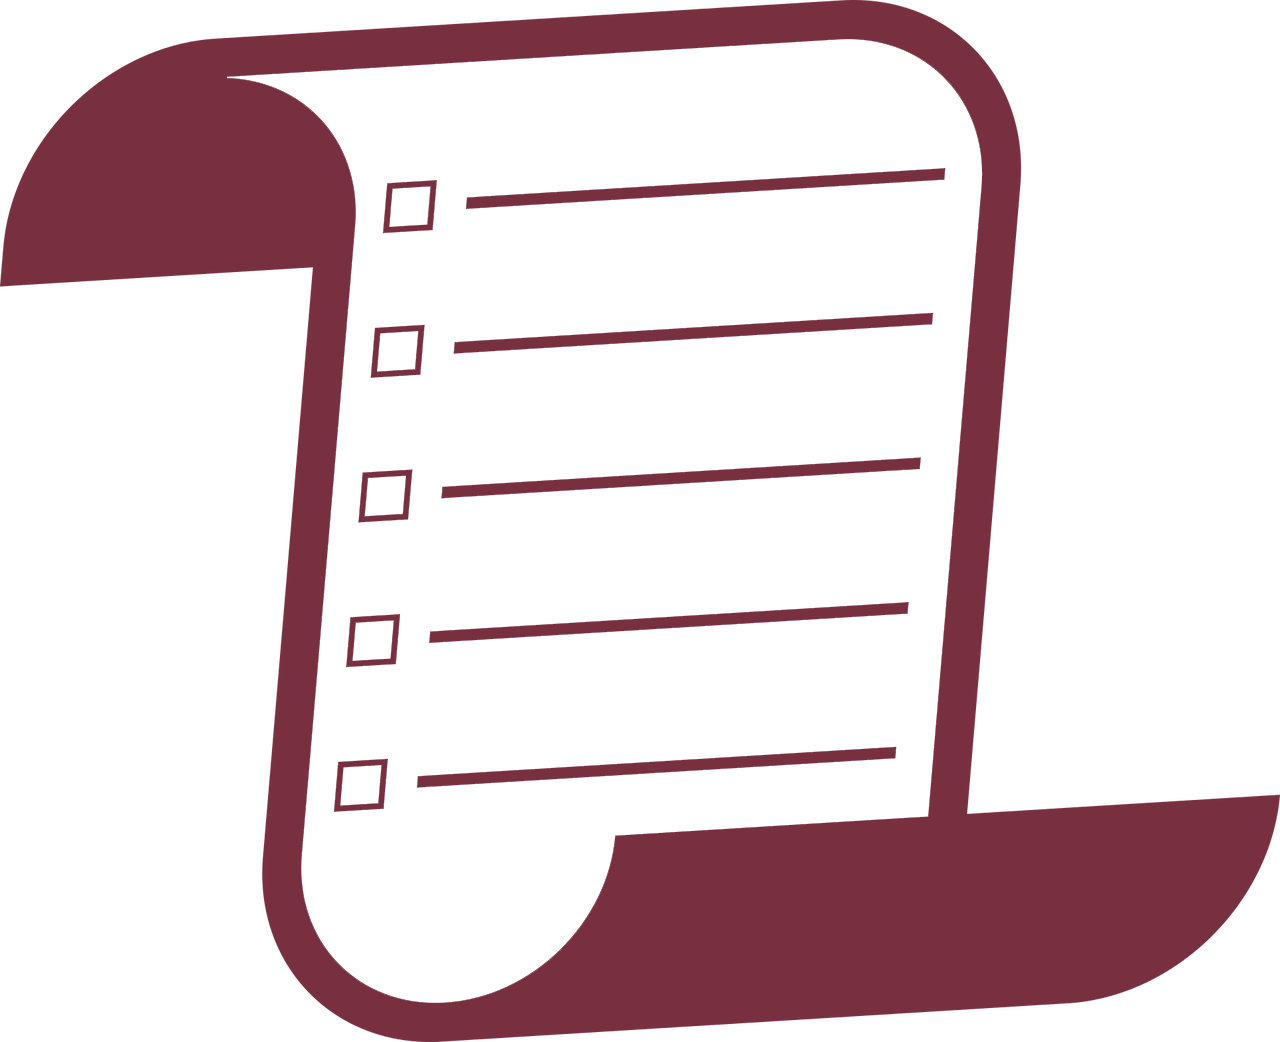 ICON: Outline of a piece of paper with a checklist in garnet